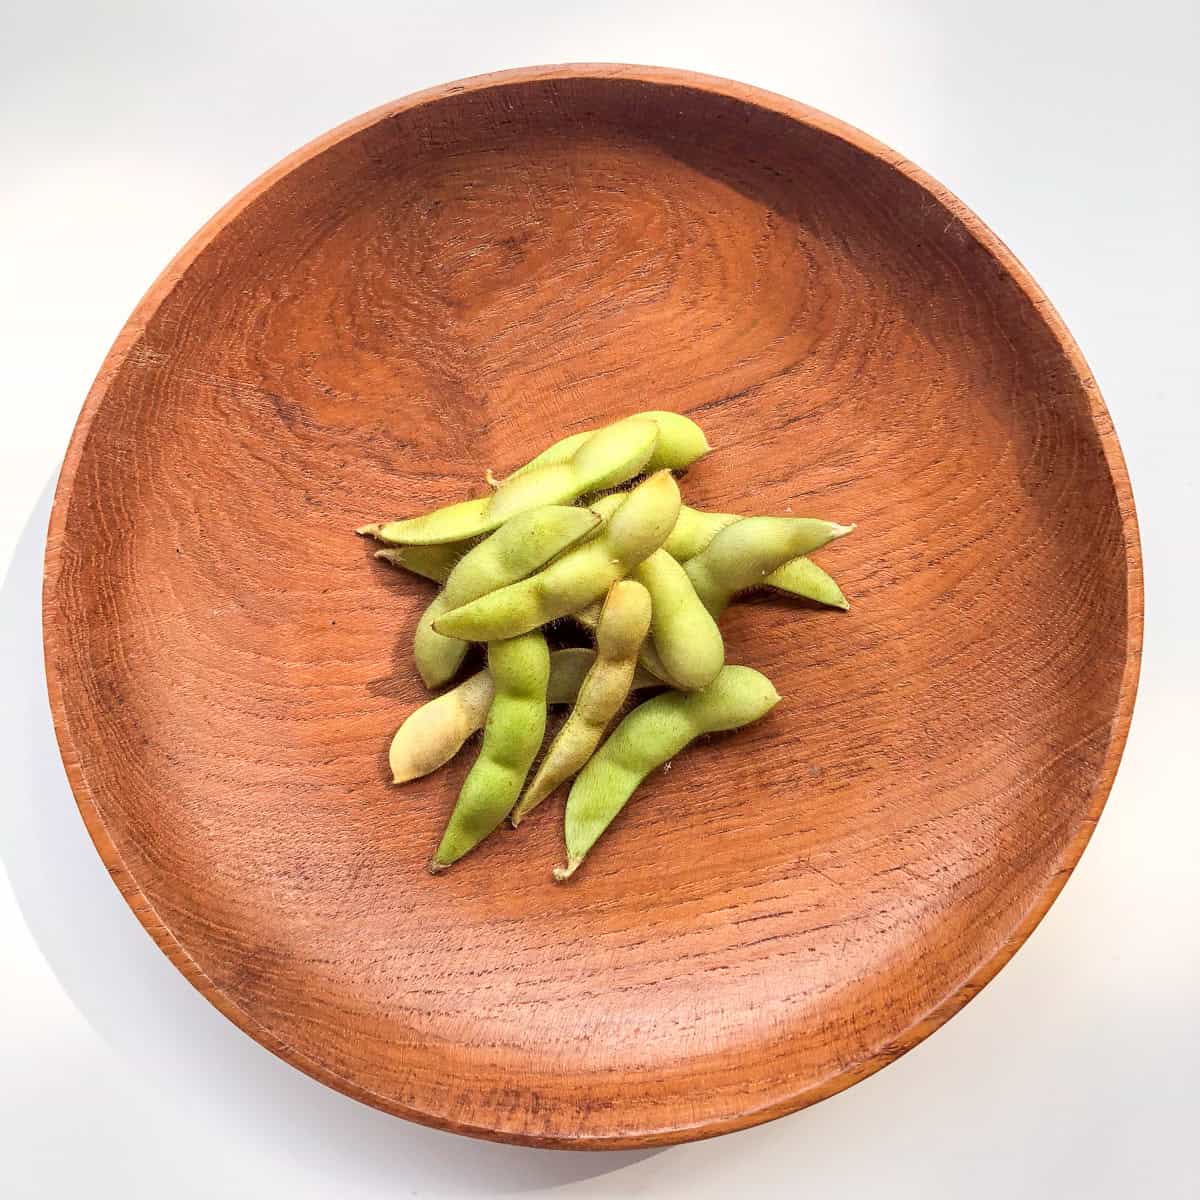 A wooden bowl containing edamame.